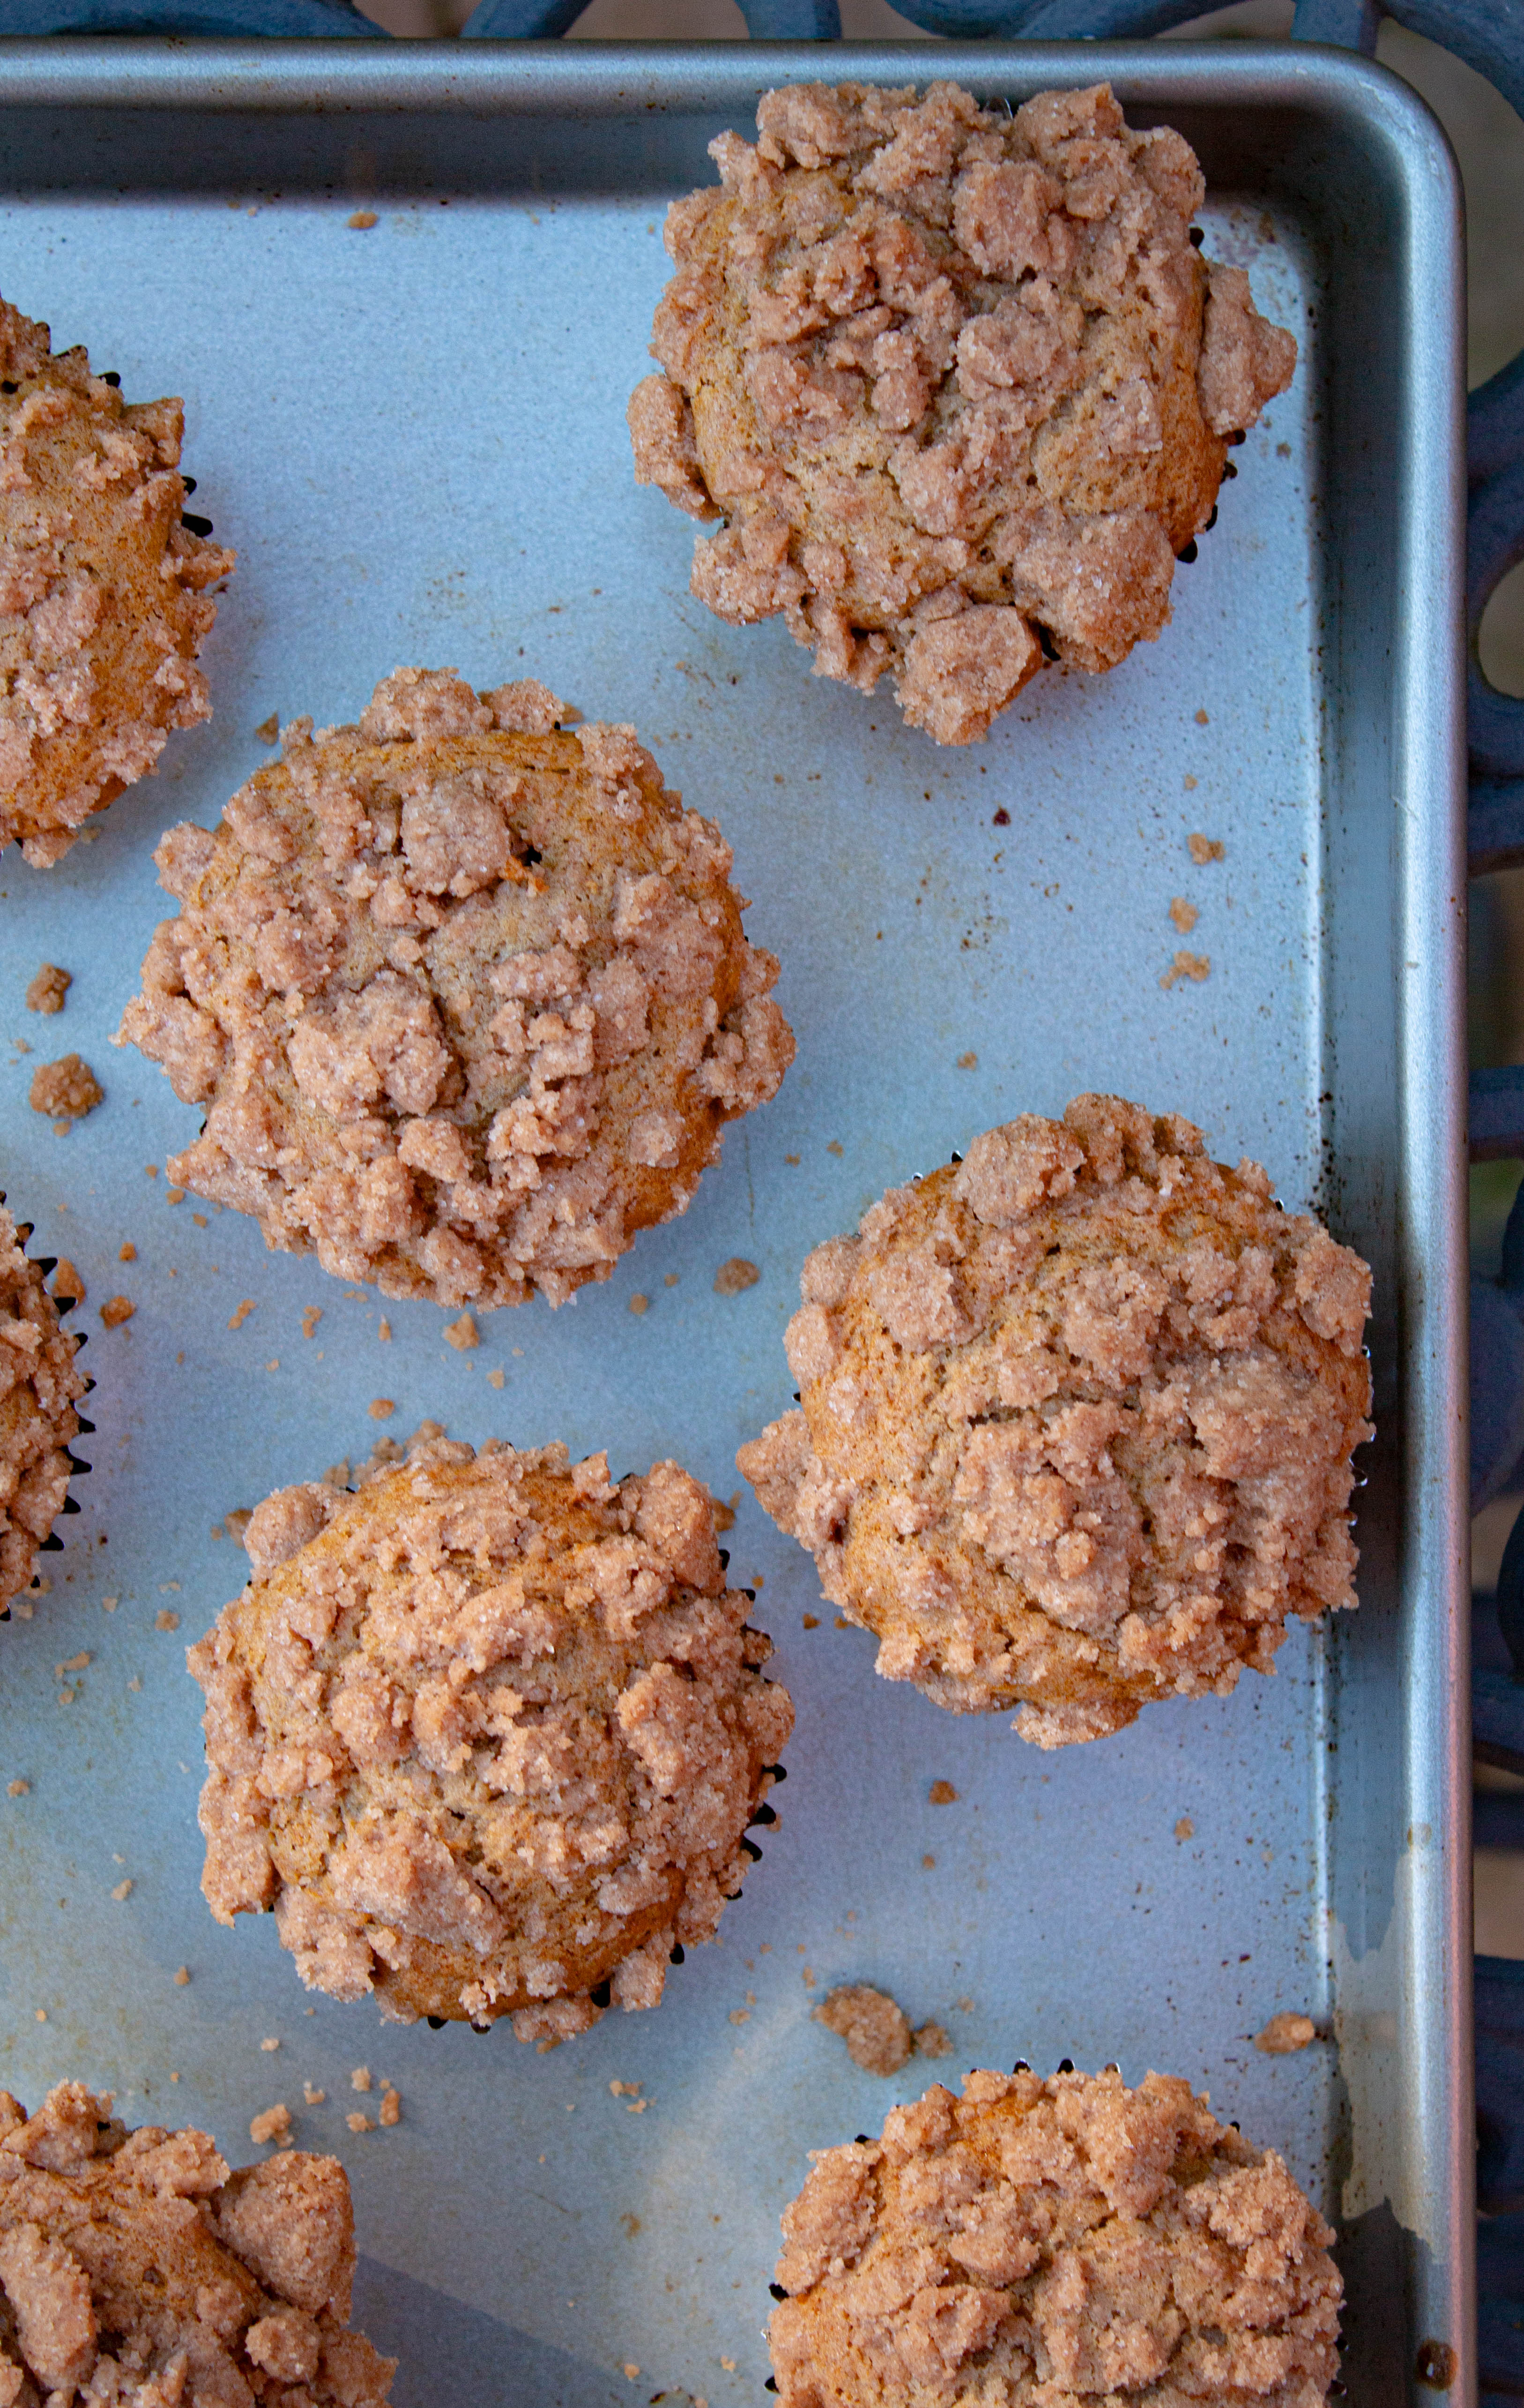 Muffins on a sheet pan with streusel crumbs.